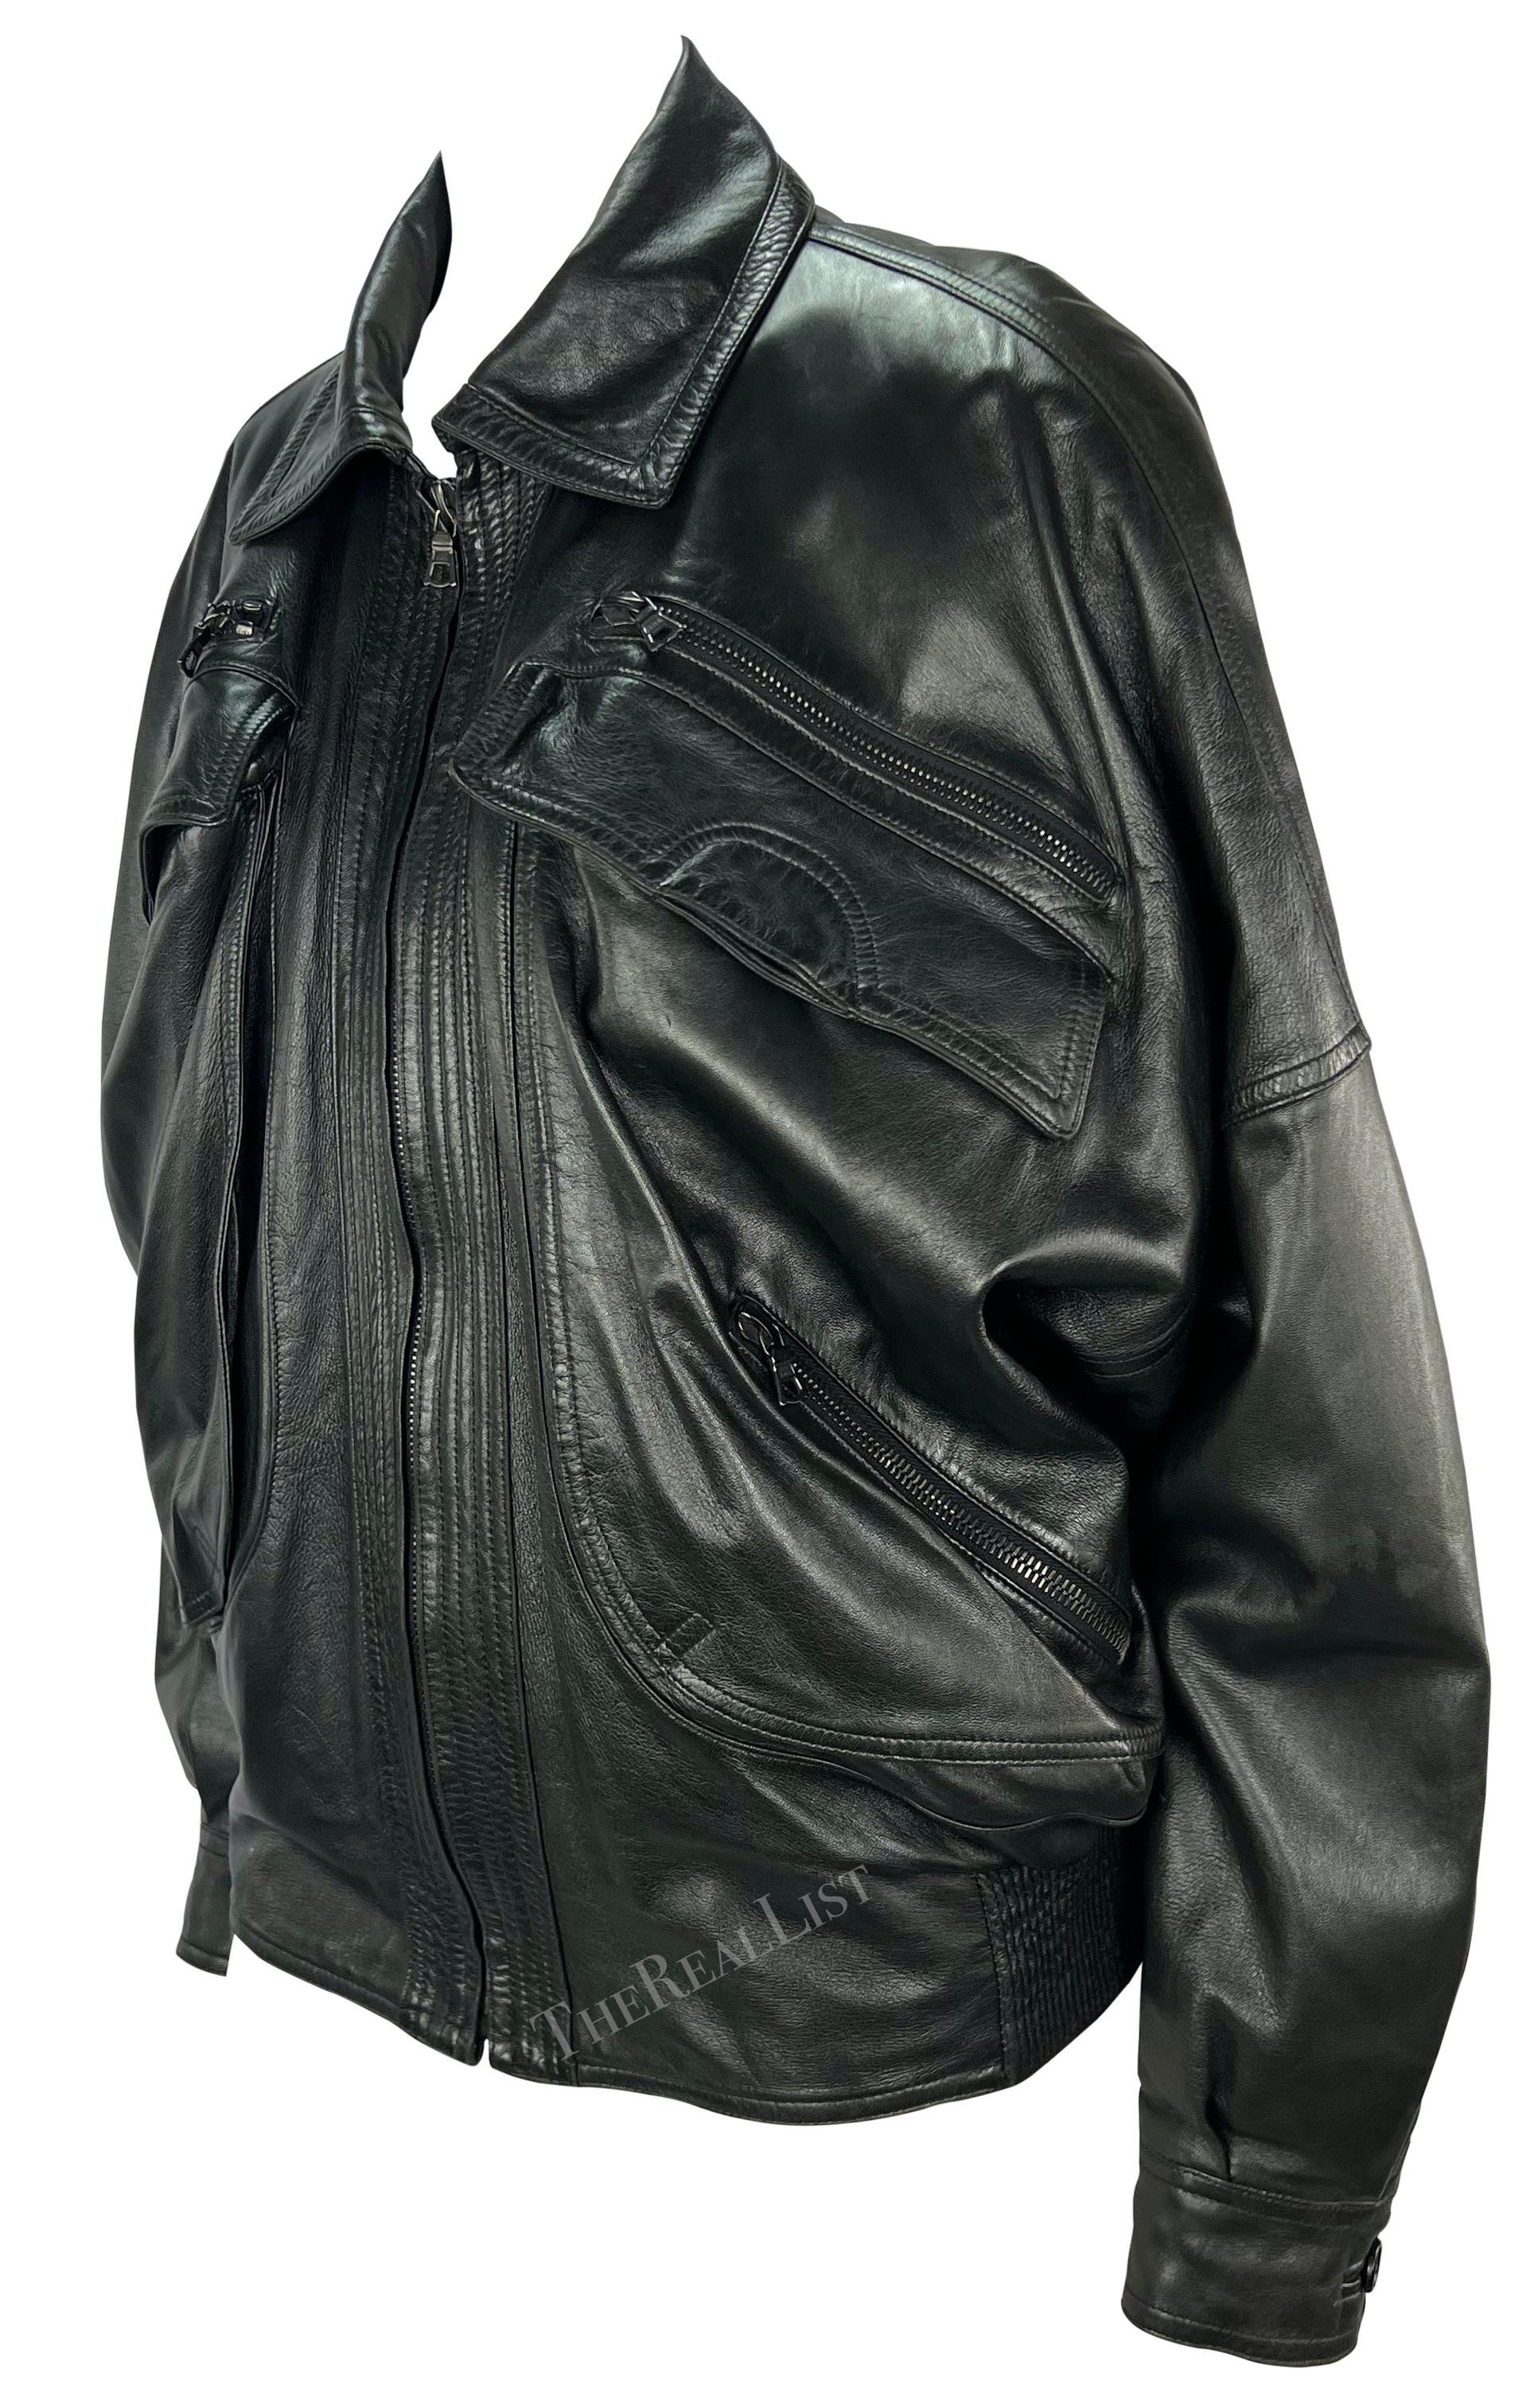 Presenting a fabulous black leather Gianni Versace oversized jacket, designed by Gianni Versace. From the late 1980s, this menswear jacket is constructed entirely of leather and features a fold-over collar and a plethora of pockets at the front. In